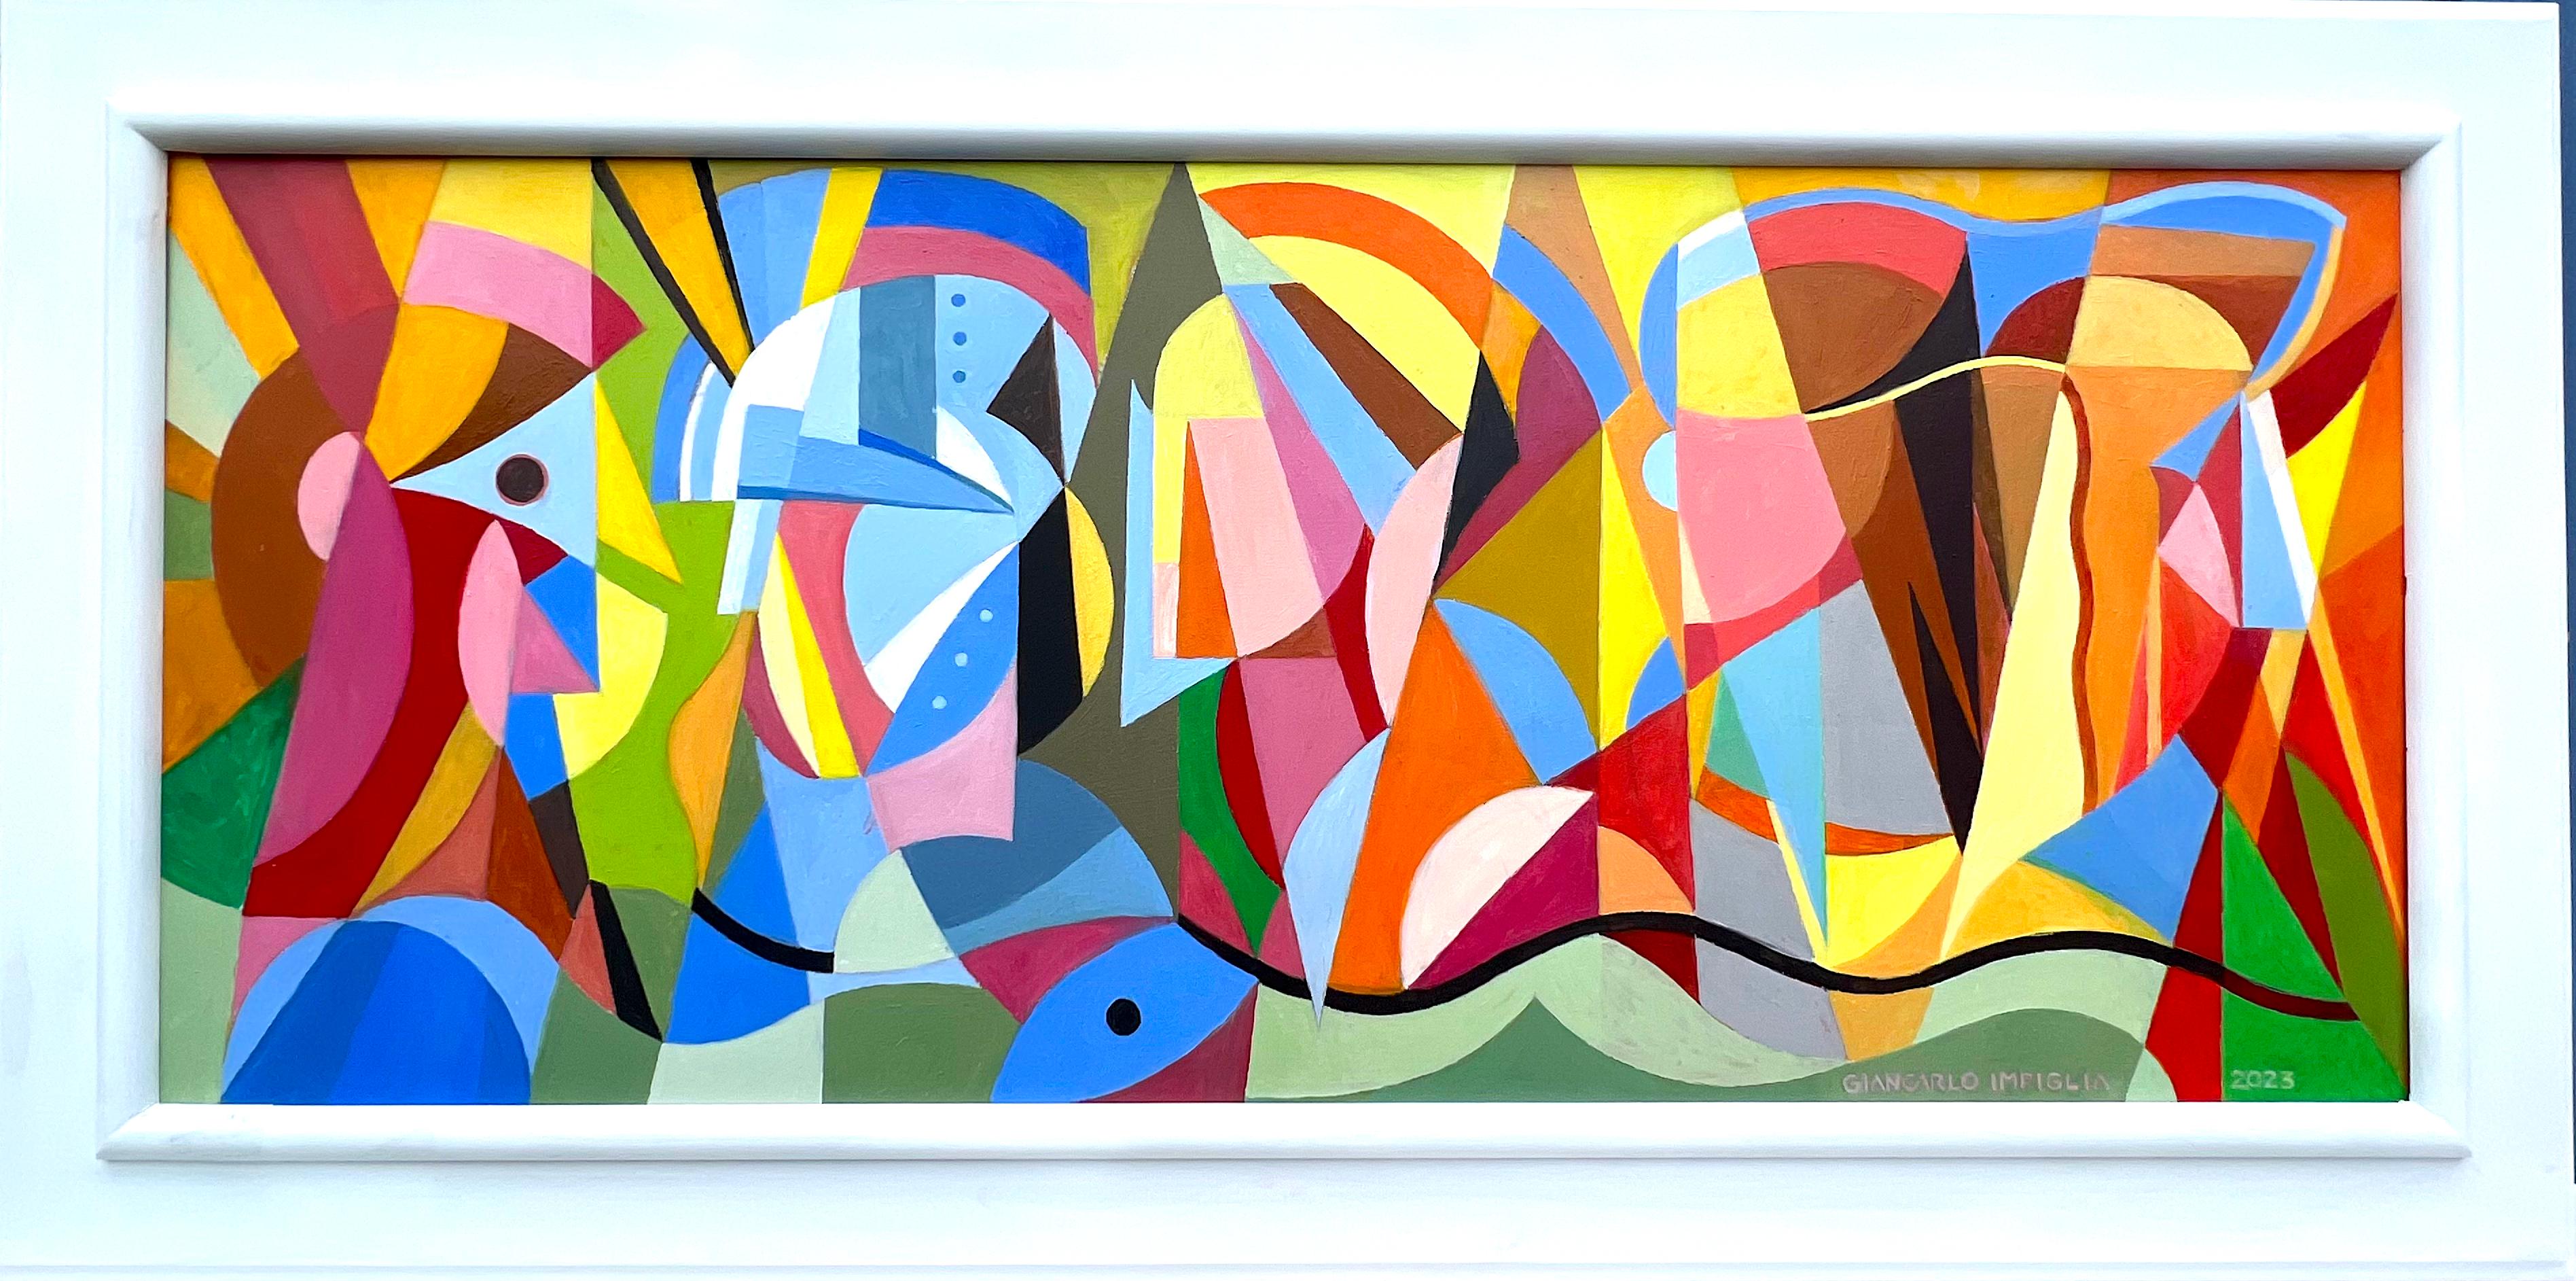 Futurist and cubist work "The Legacy of Futurism" by iconic artist Impiglia 